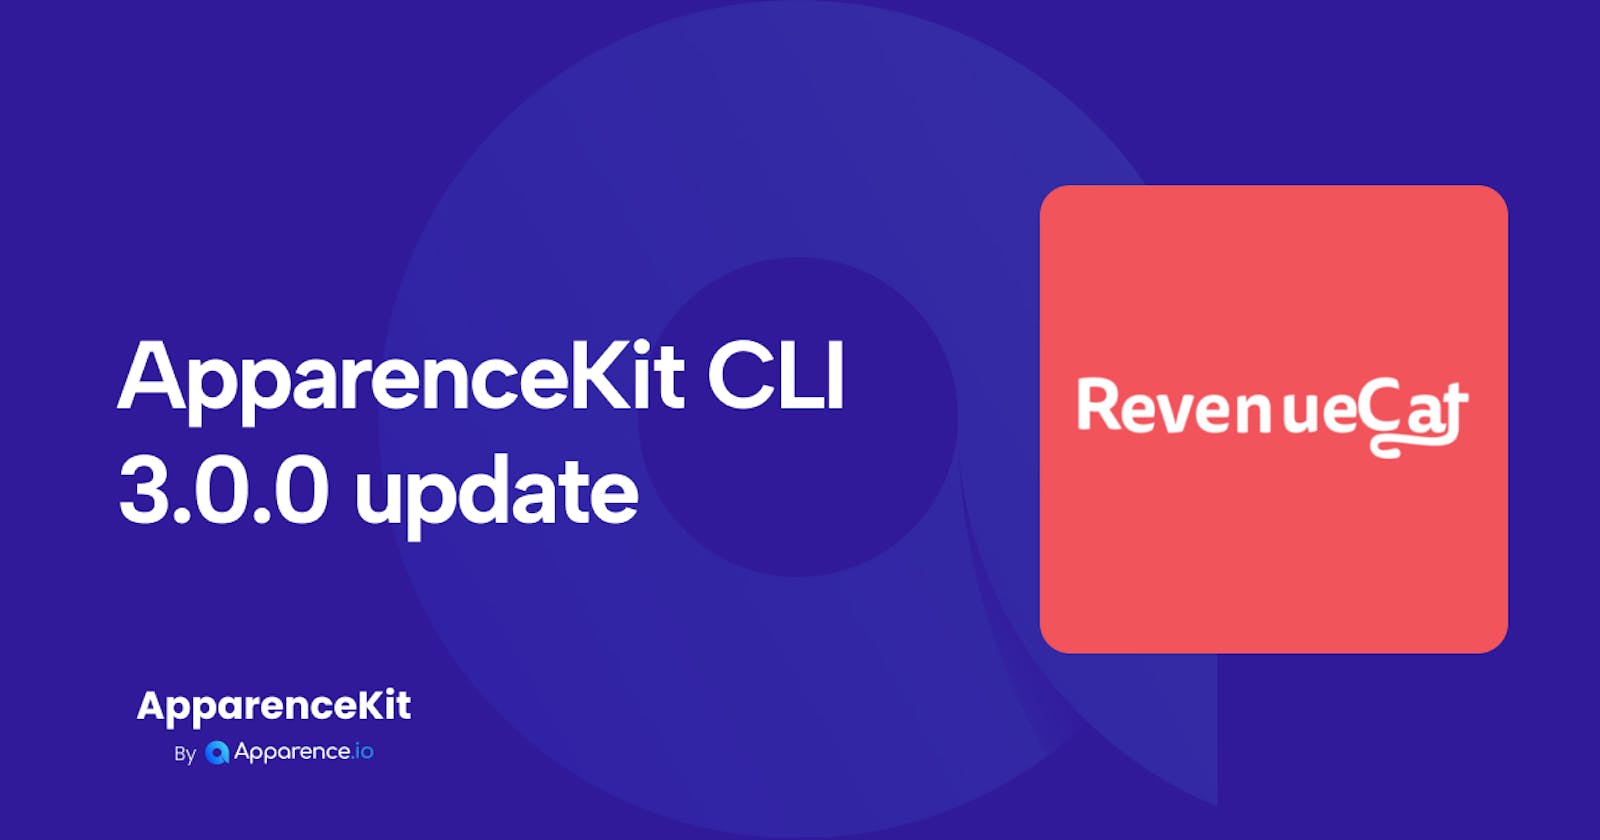 ApparenceKit CLI 3.0.0 release note: RevenueCat, Anonymous authentication and more